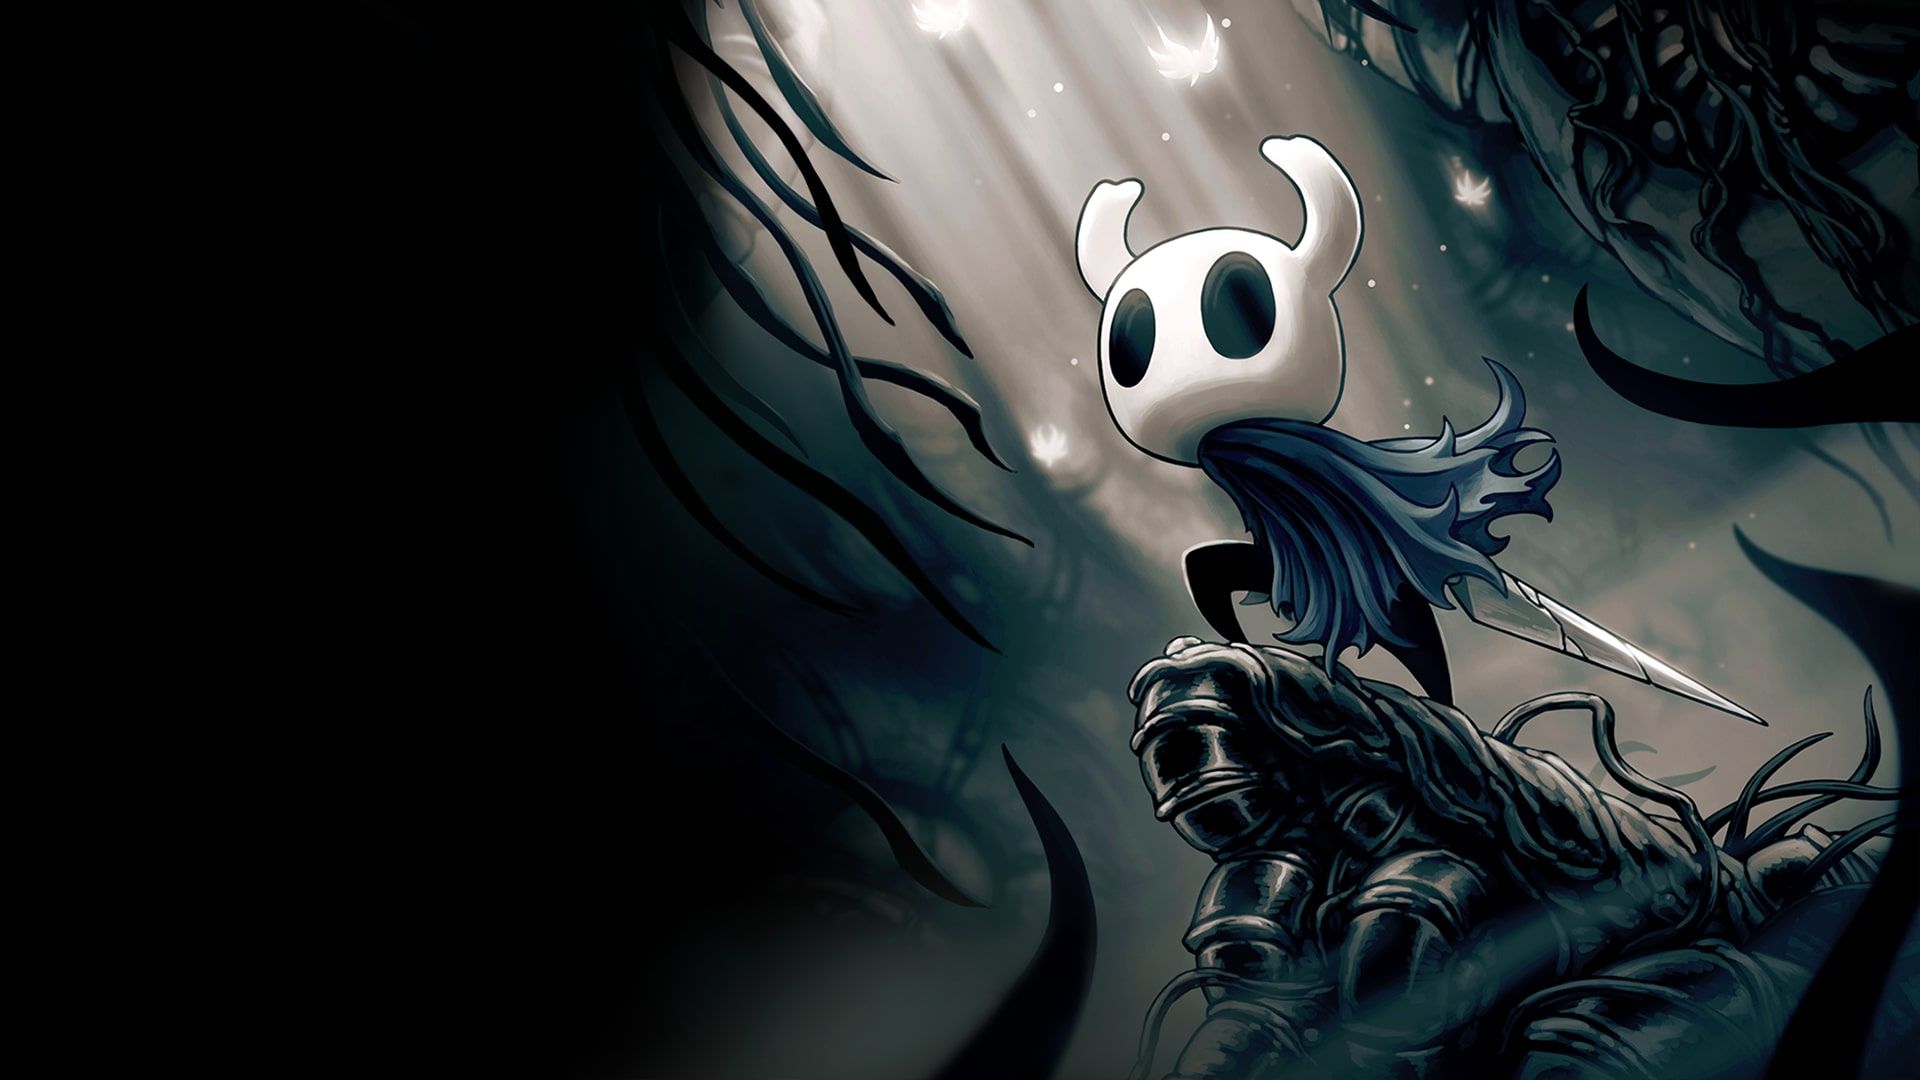 Hollow Knight cover image